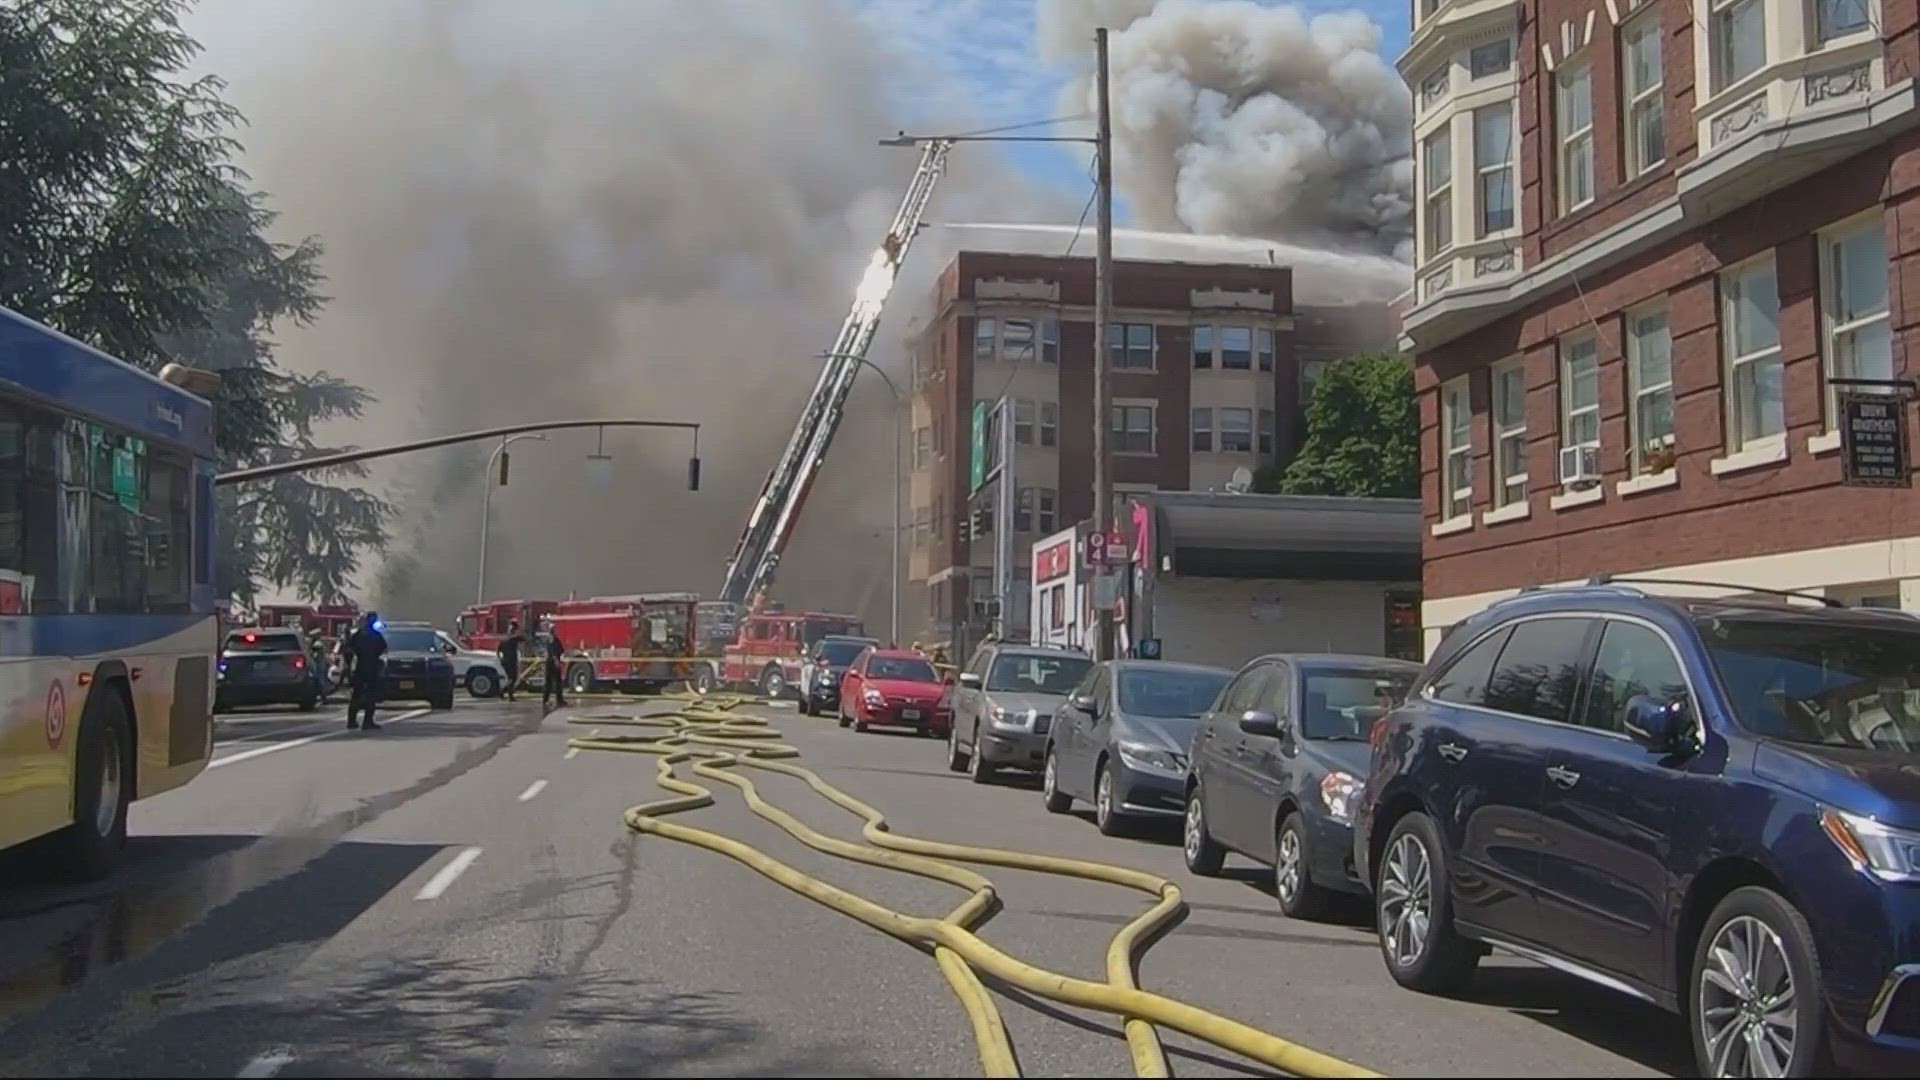 The 100-year-old building at Southwest 13th and Taylor went up in flames on Tuesday. Firefighters had to rescue multiple people.